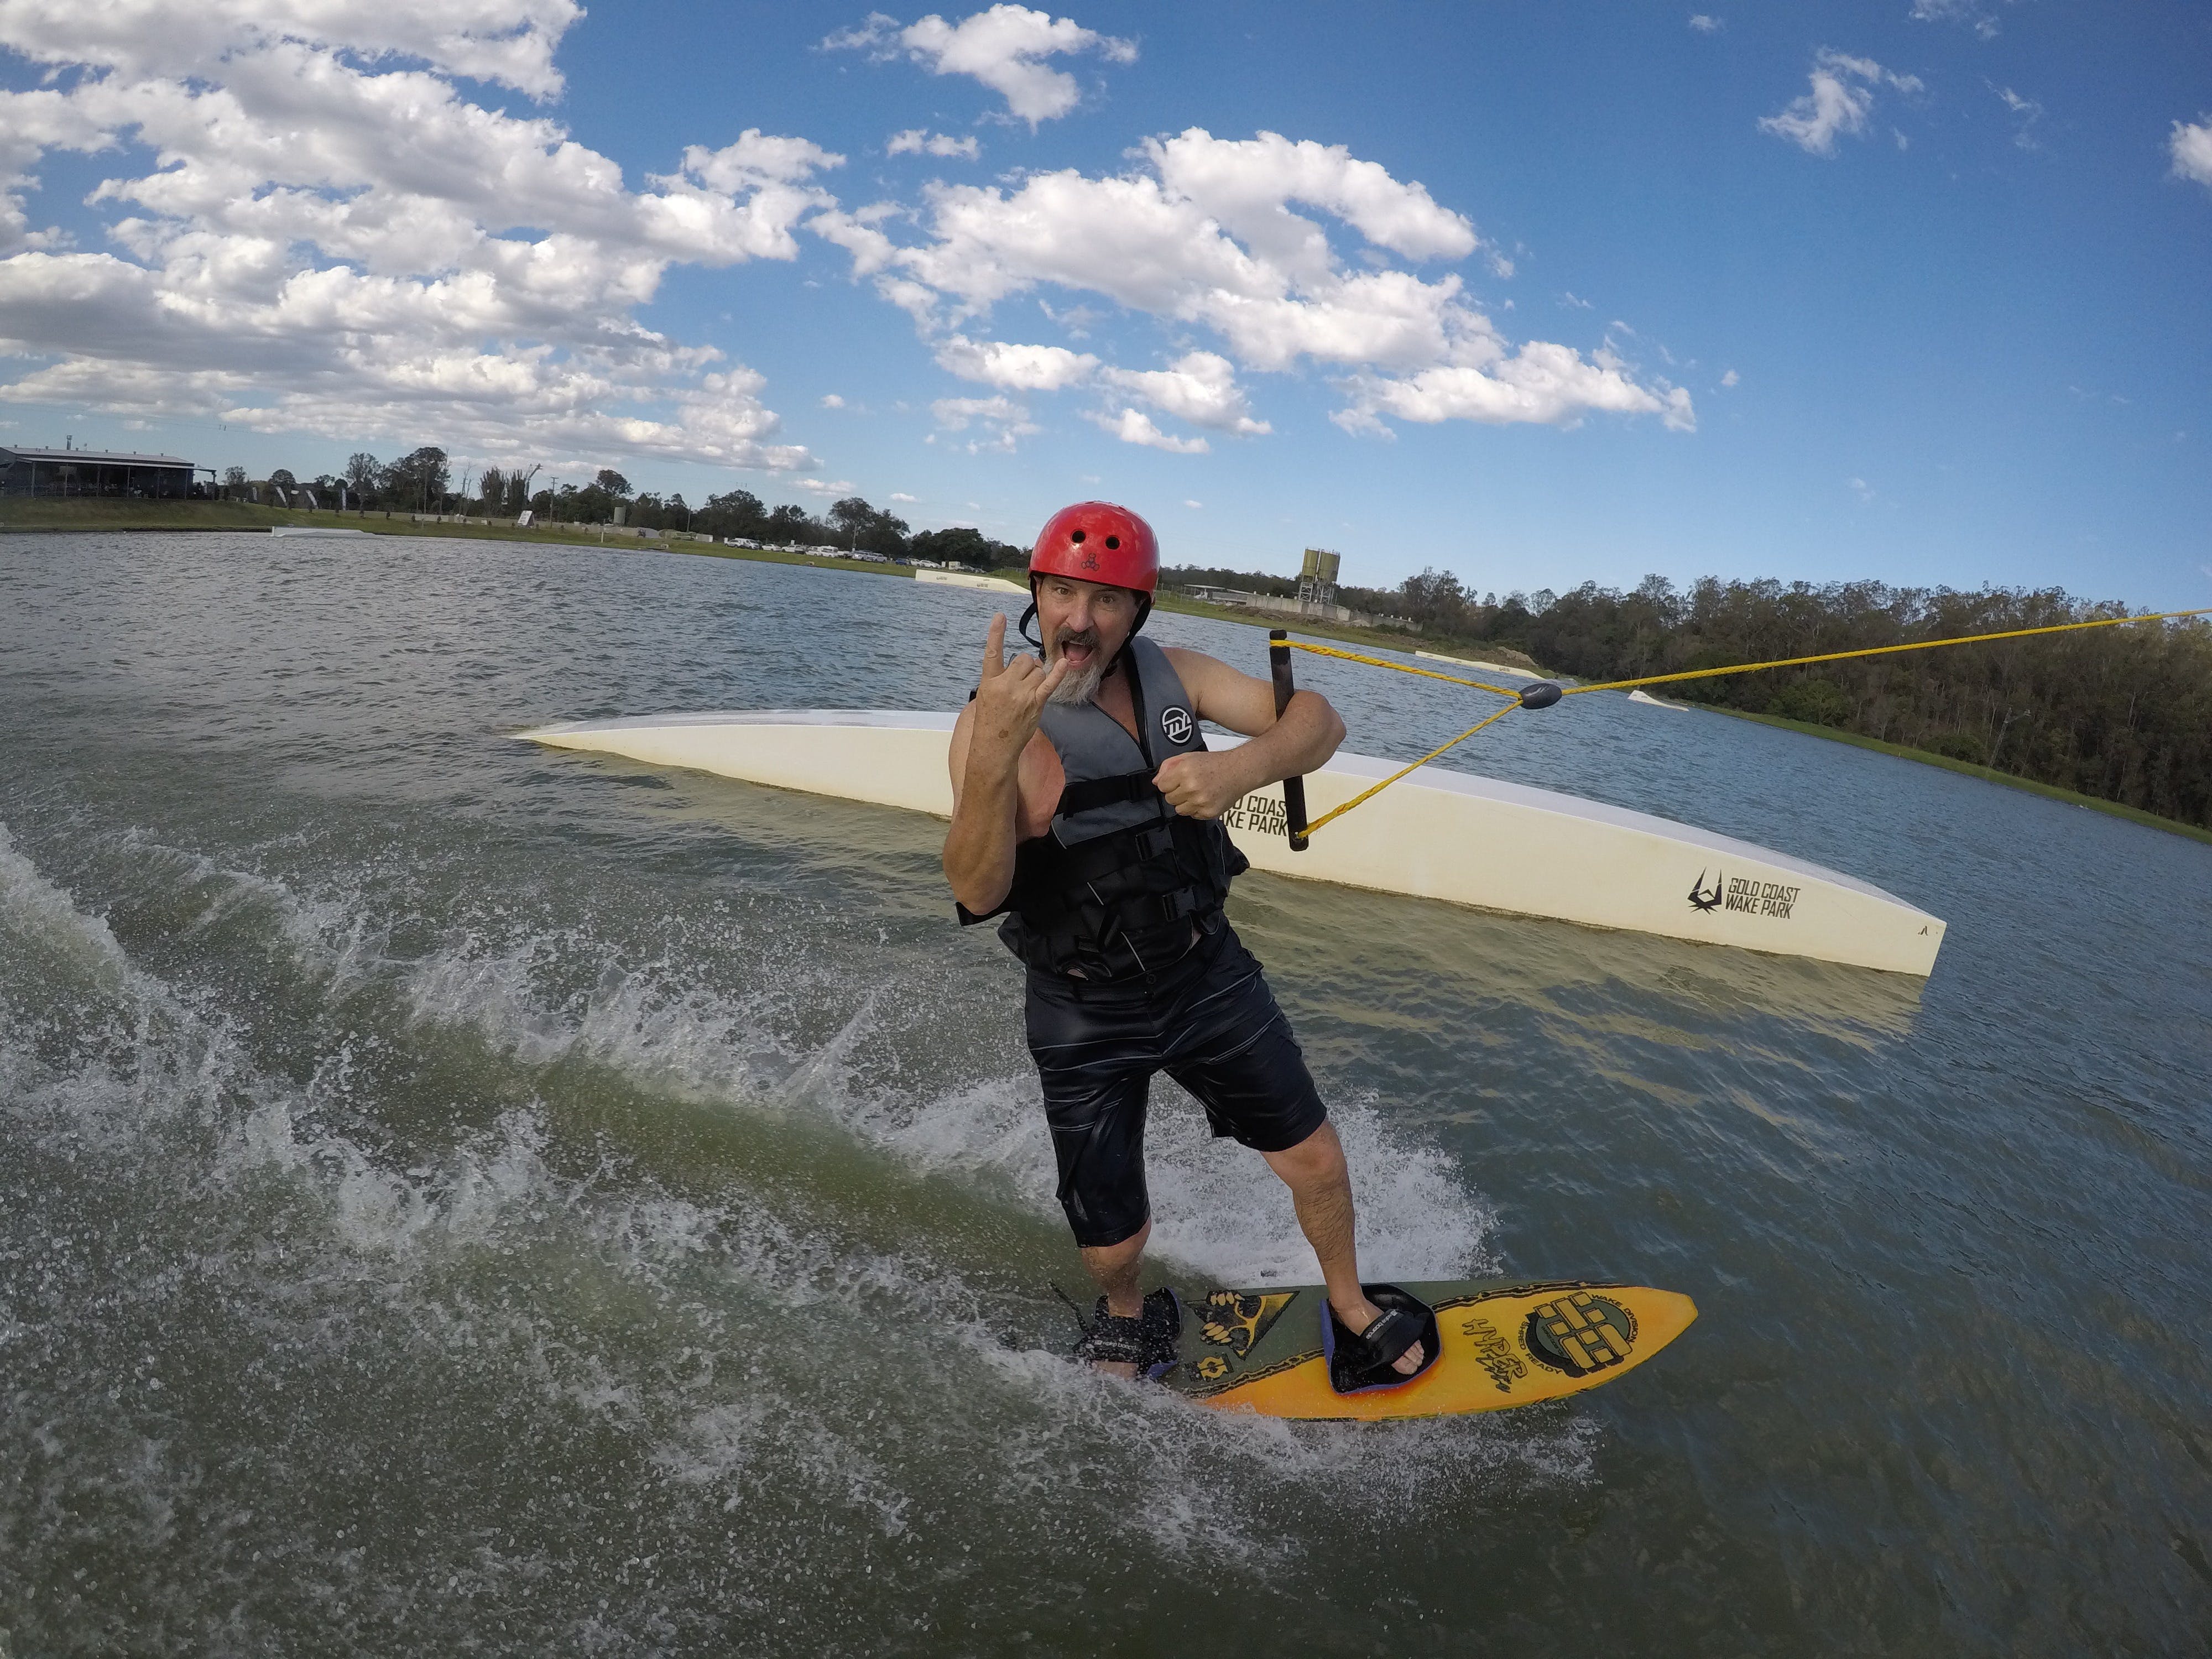 GC Wake Park - Find Attractions